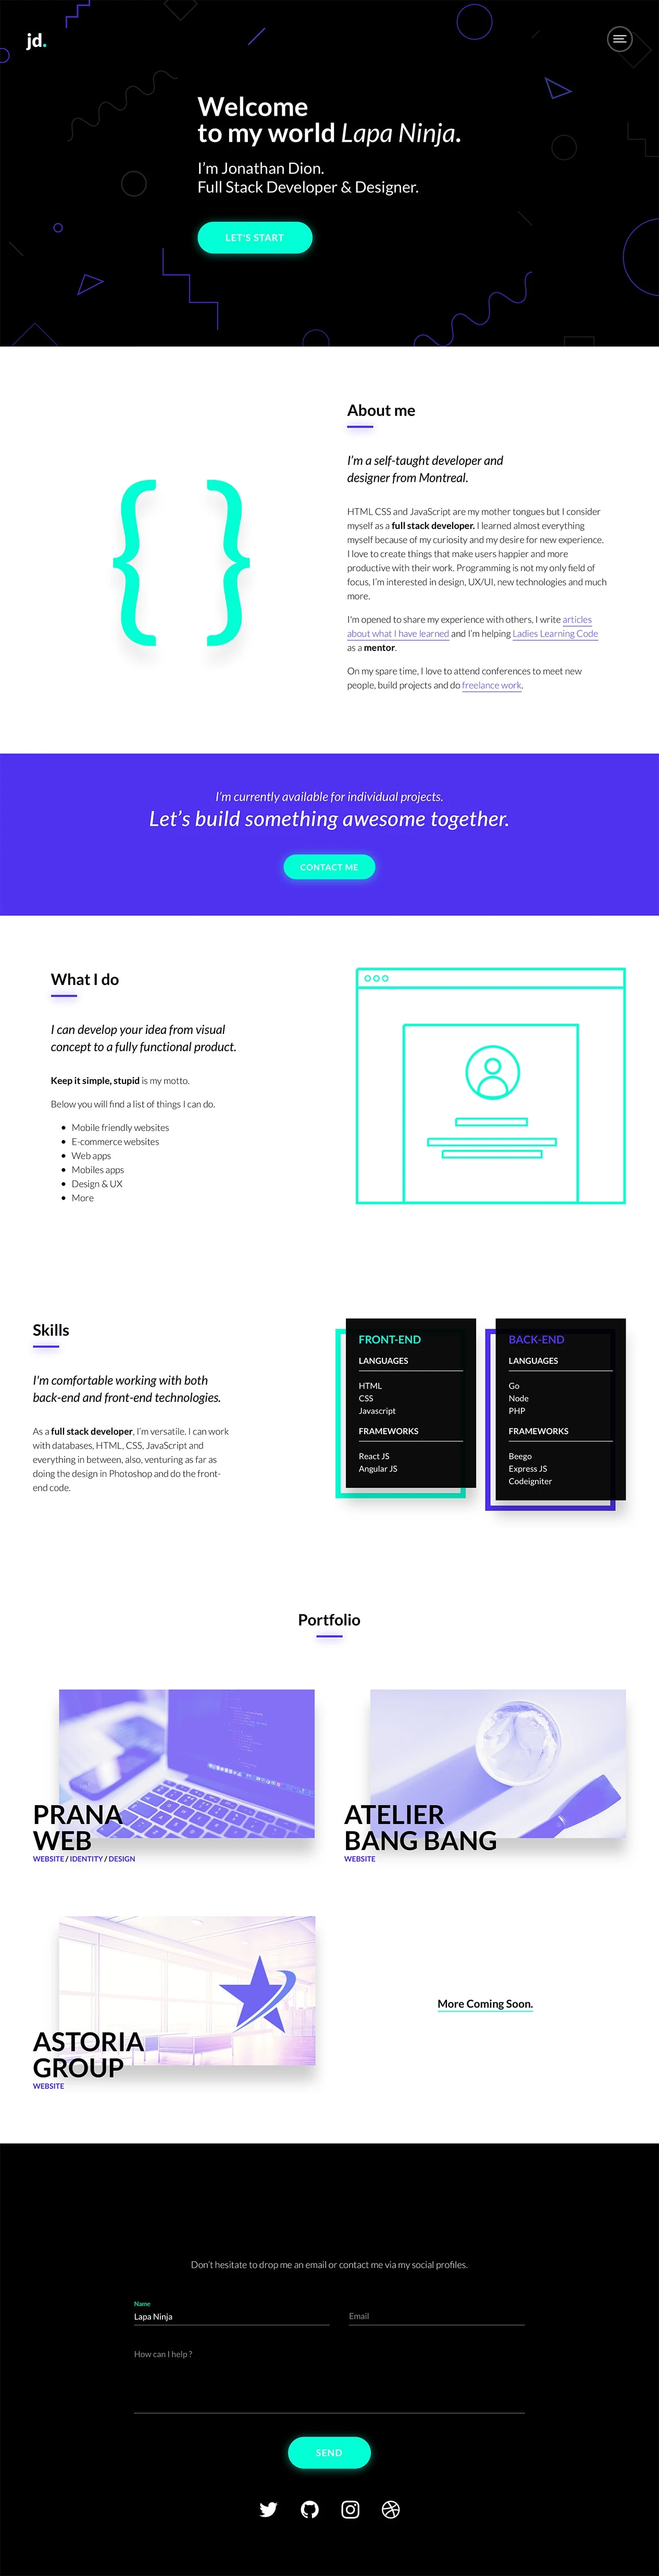 Jonathan Dion Landing Page Example: Jonathan Dion is a self-taught developer and designer from Montreal.